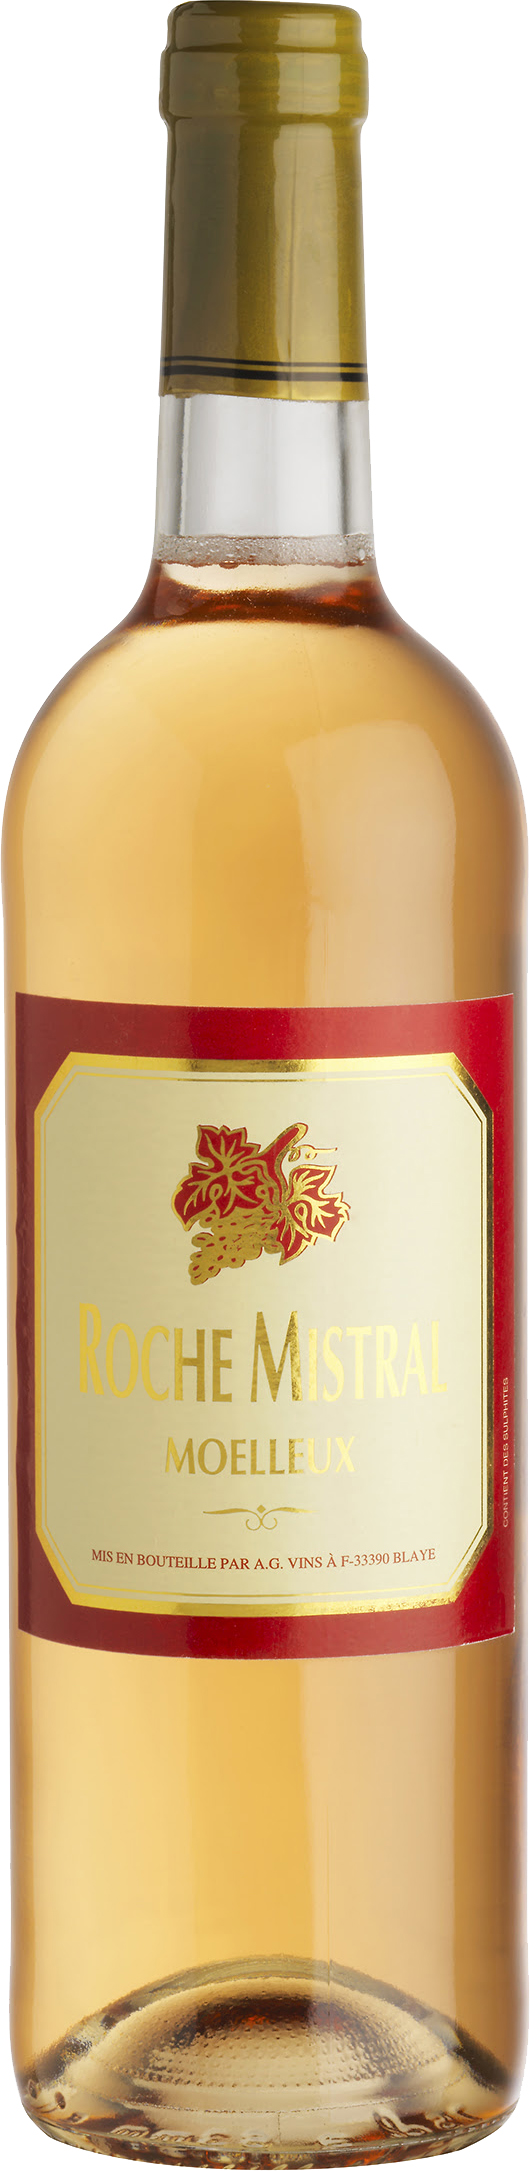 Roche Mistral RosÃ© Moelleux